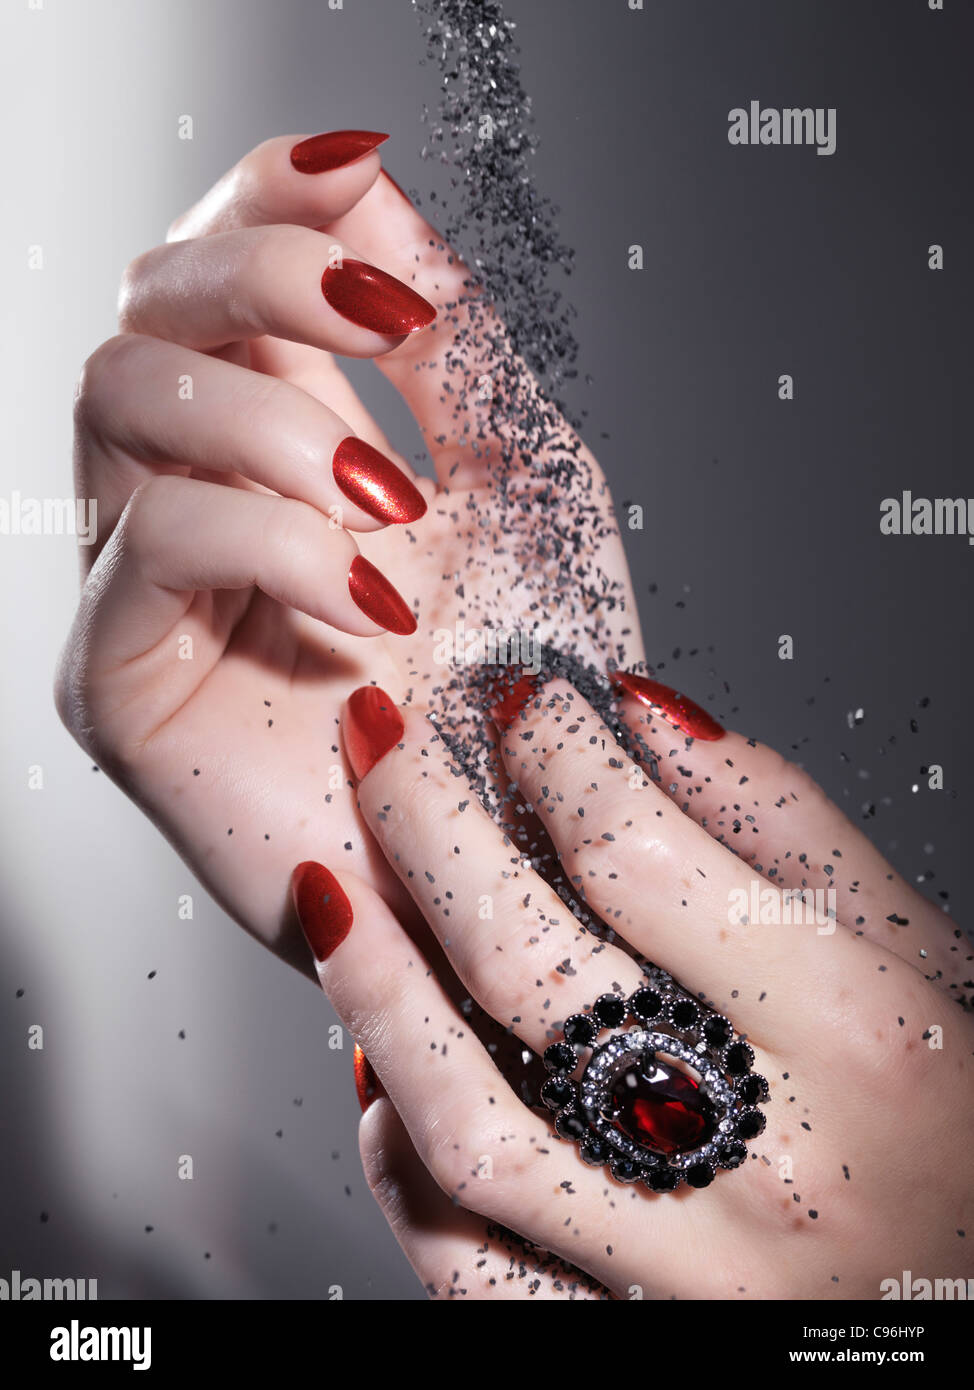 License available at MaximImages.com Black sand falling on woman's hands with bright red nail polish and a red stone ring Stock Photo